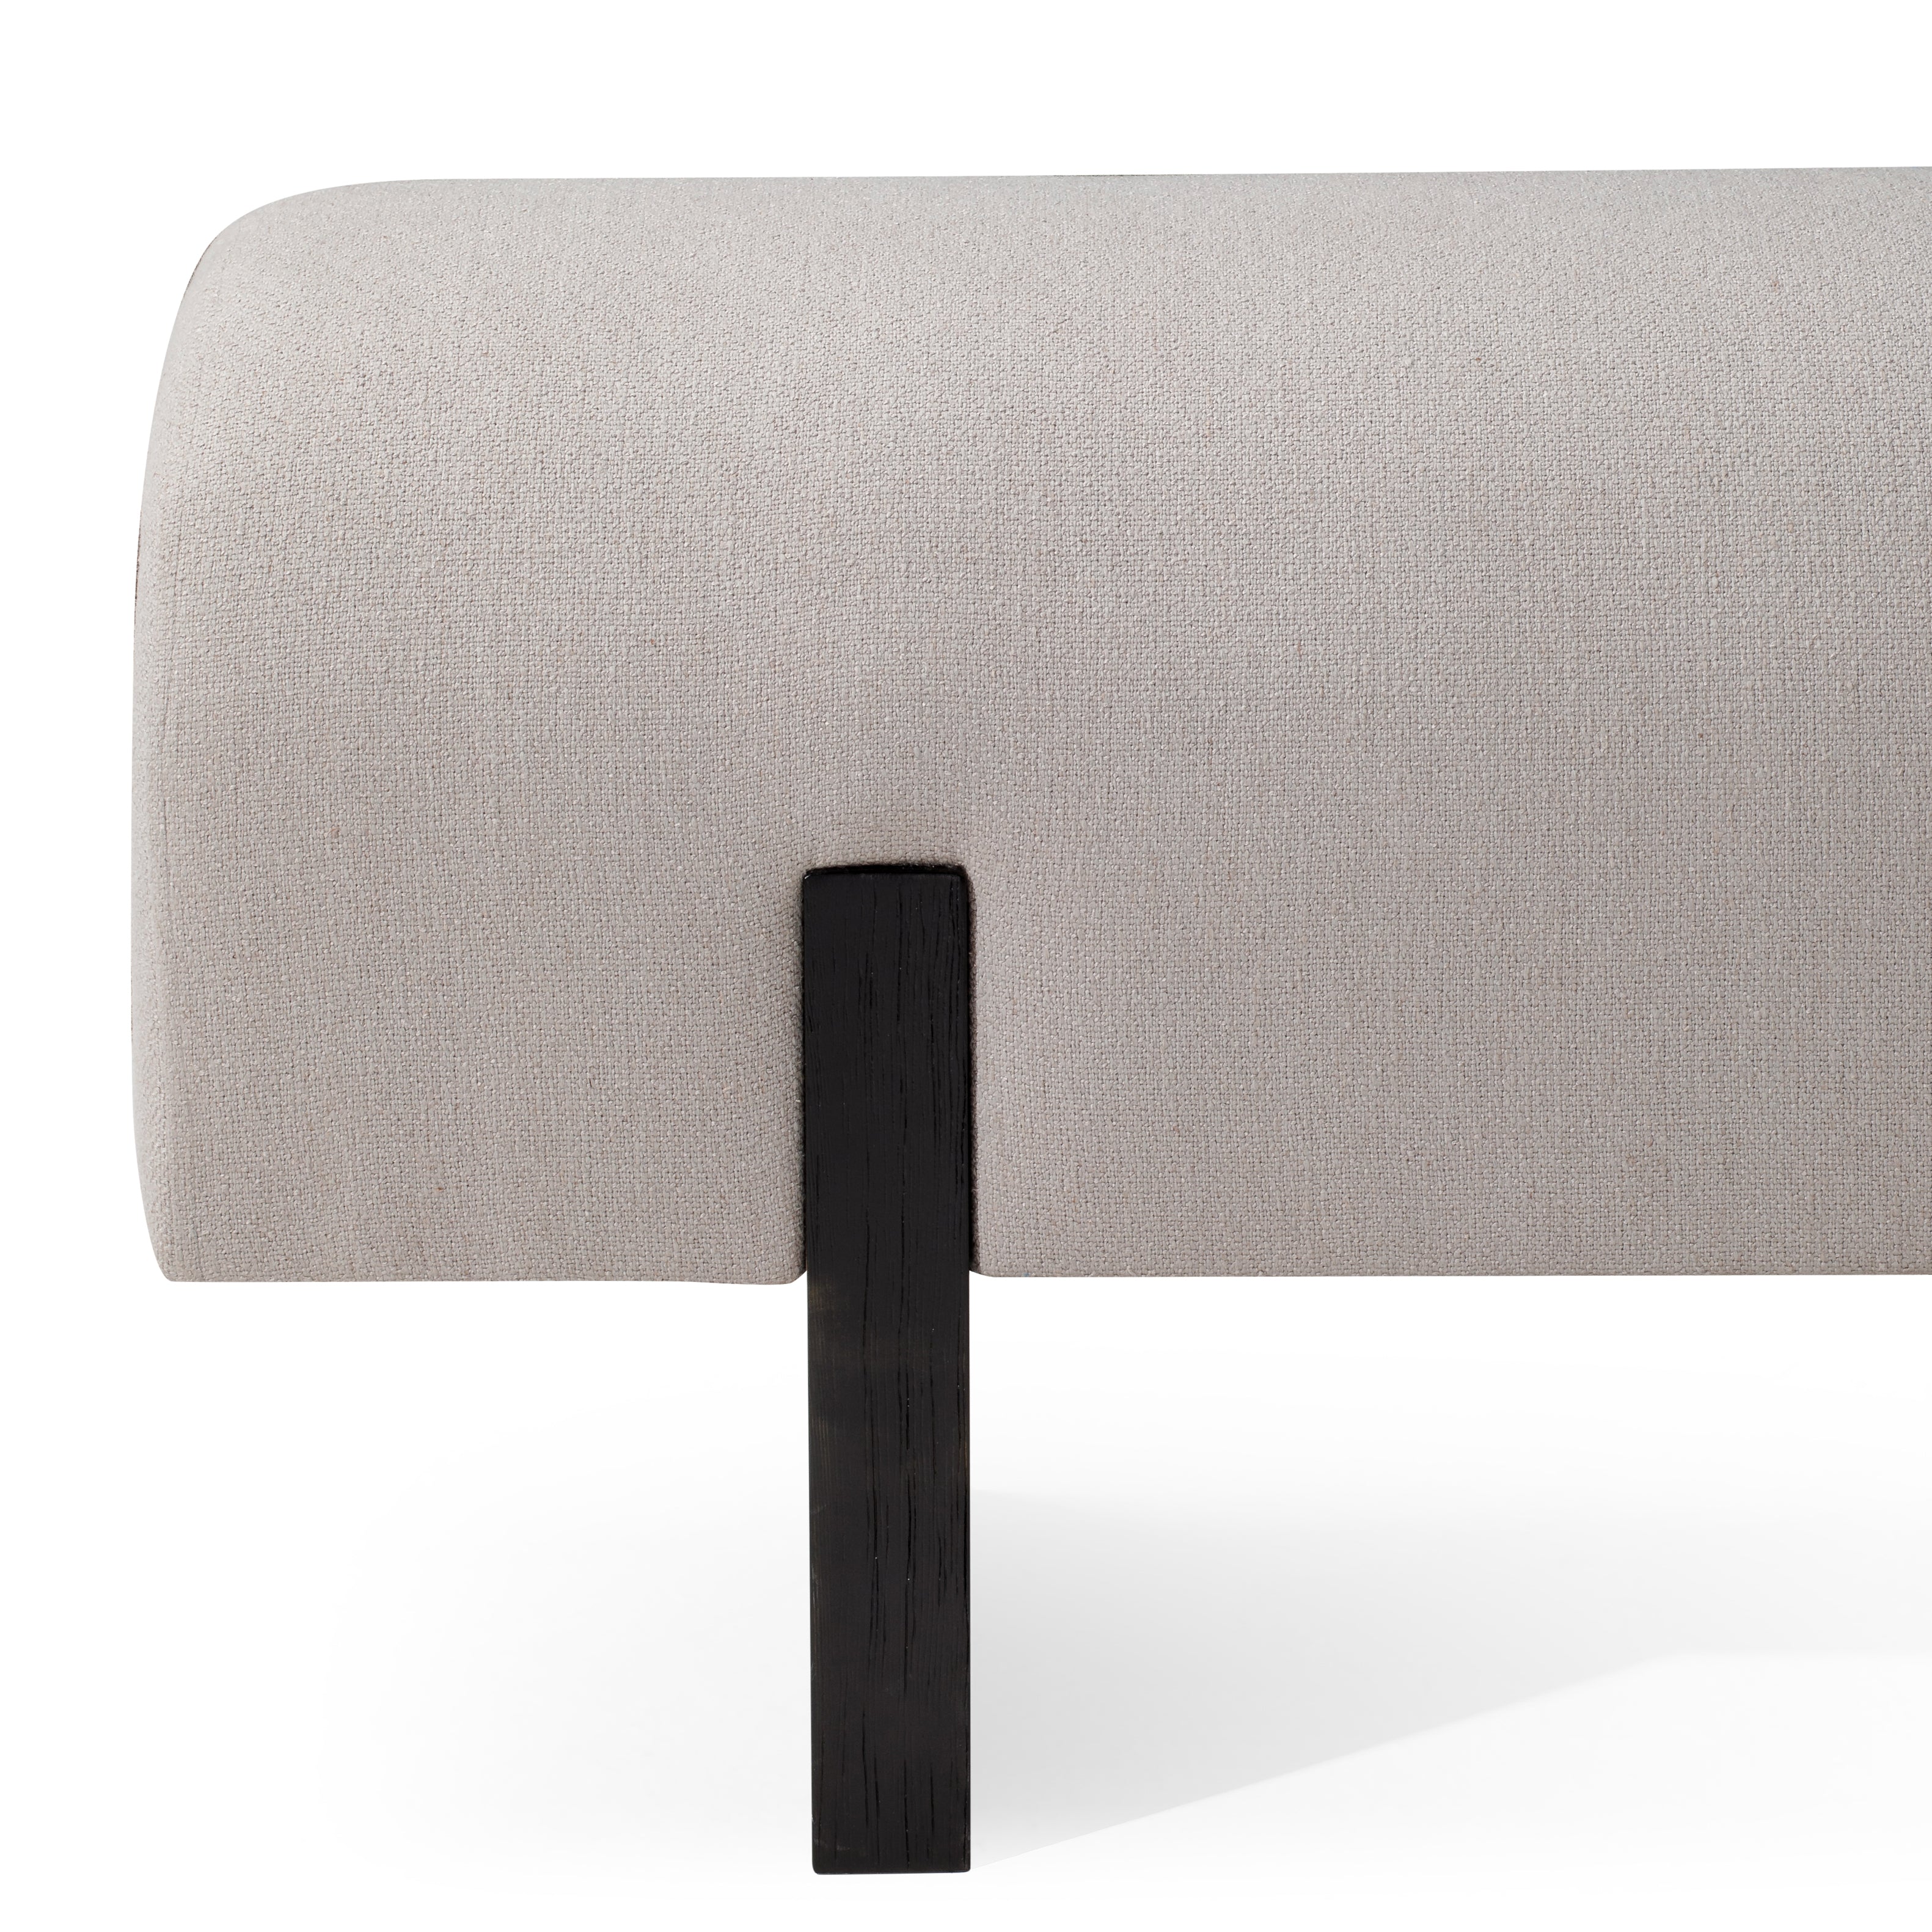 Juno Contemporary Upholstered Wooden Bench in Refined Black Finish in Ottomans & Benches by Maven Lane